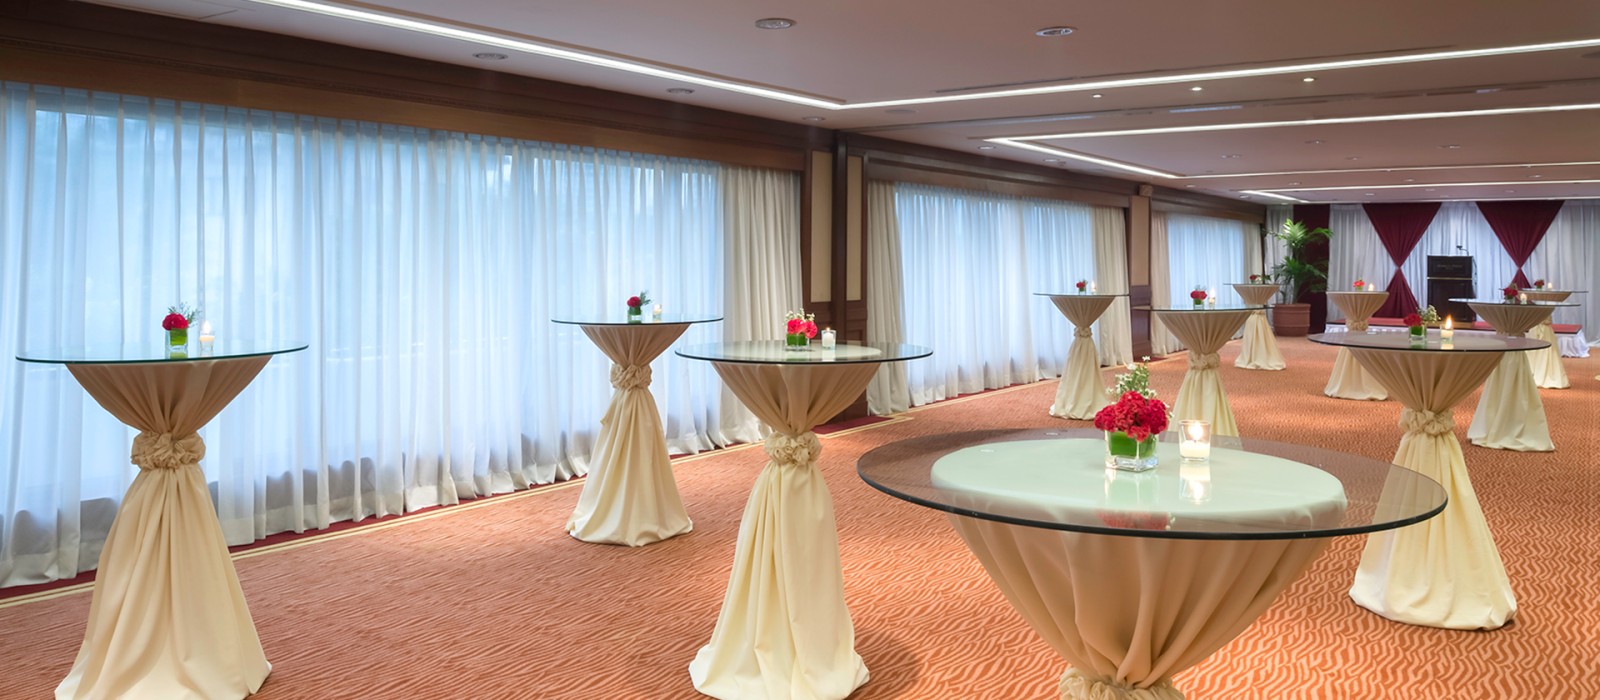 The light-filled Manila room accommodates up to 360 guests and is easily divisible into three smaller areas for initmate gatherings.